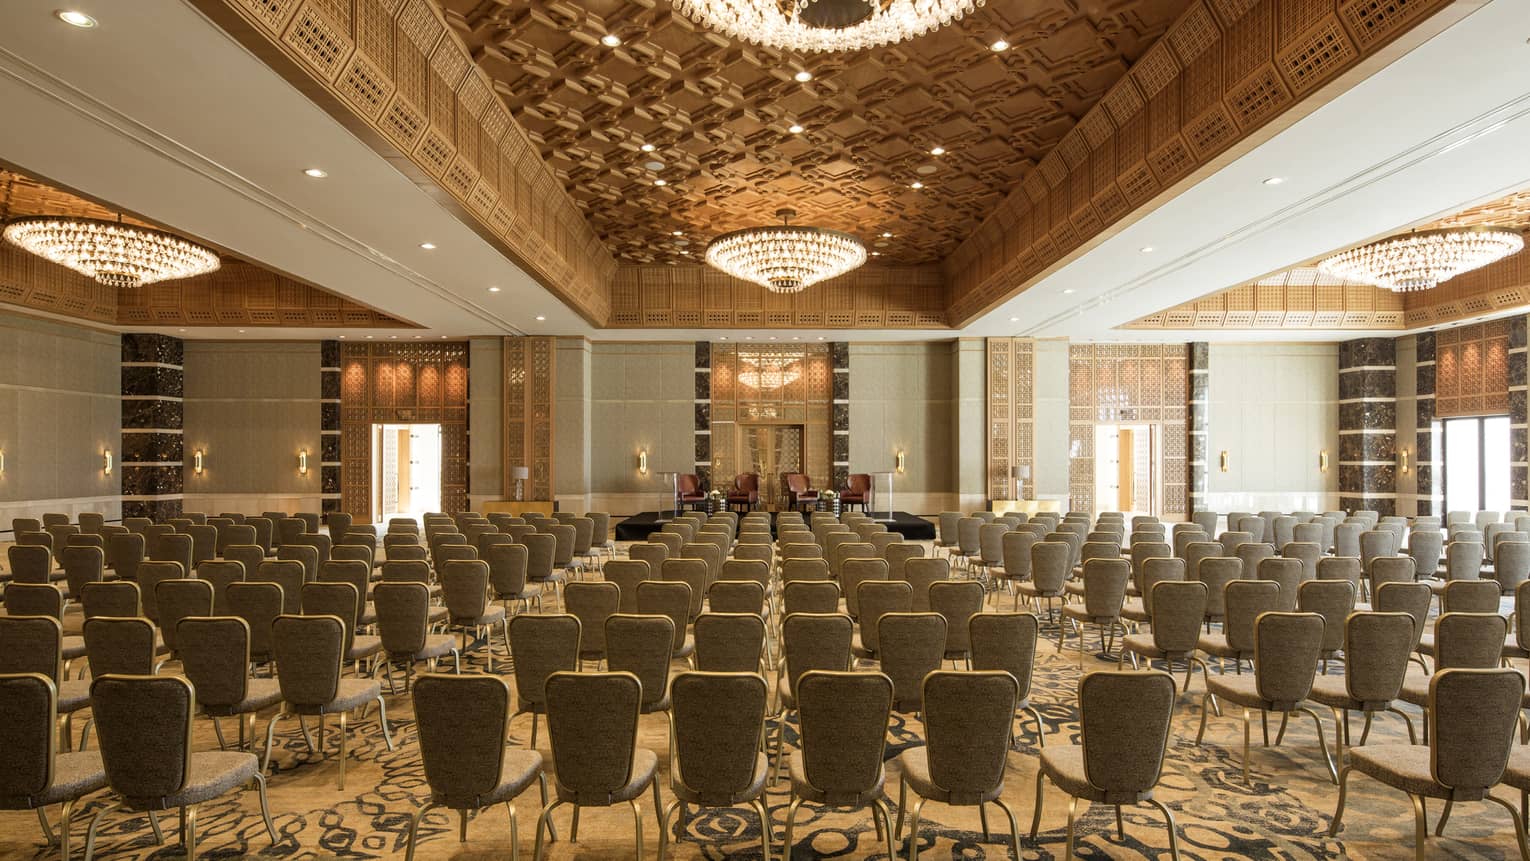 Chairs arranged in rows in Jasmin Ballroom accented with gold and large chandeliers 